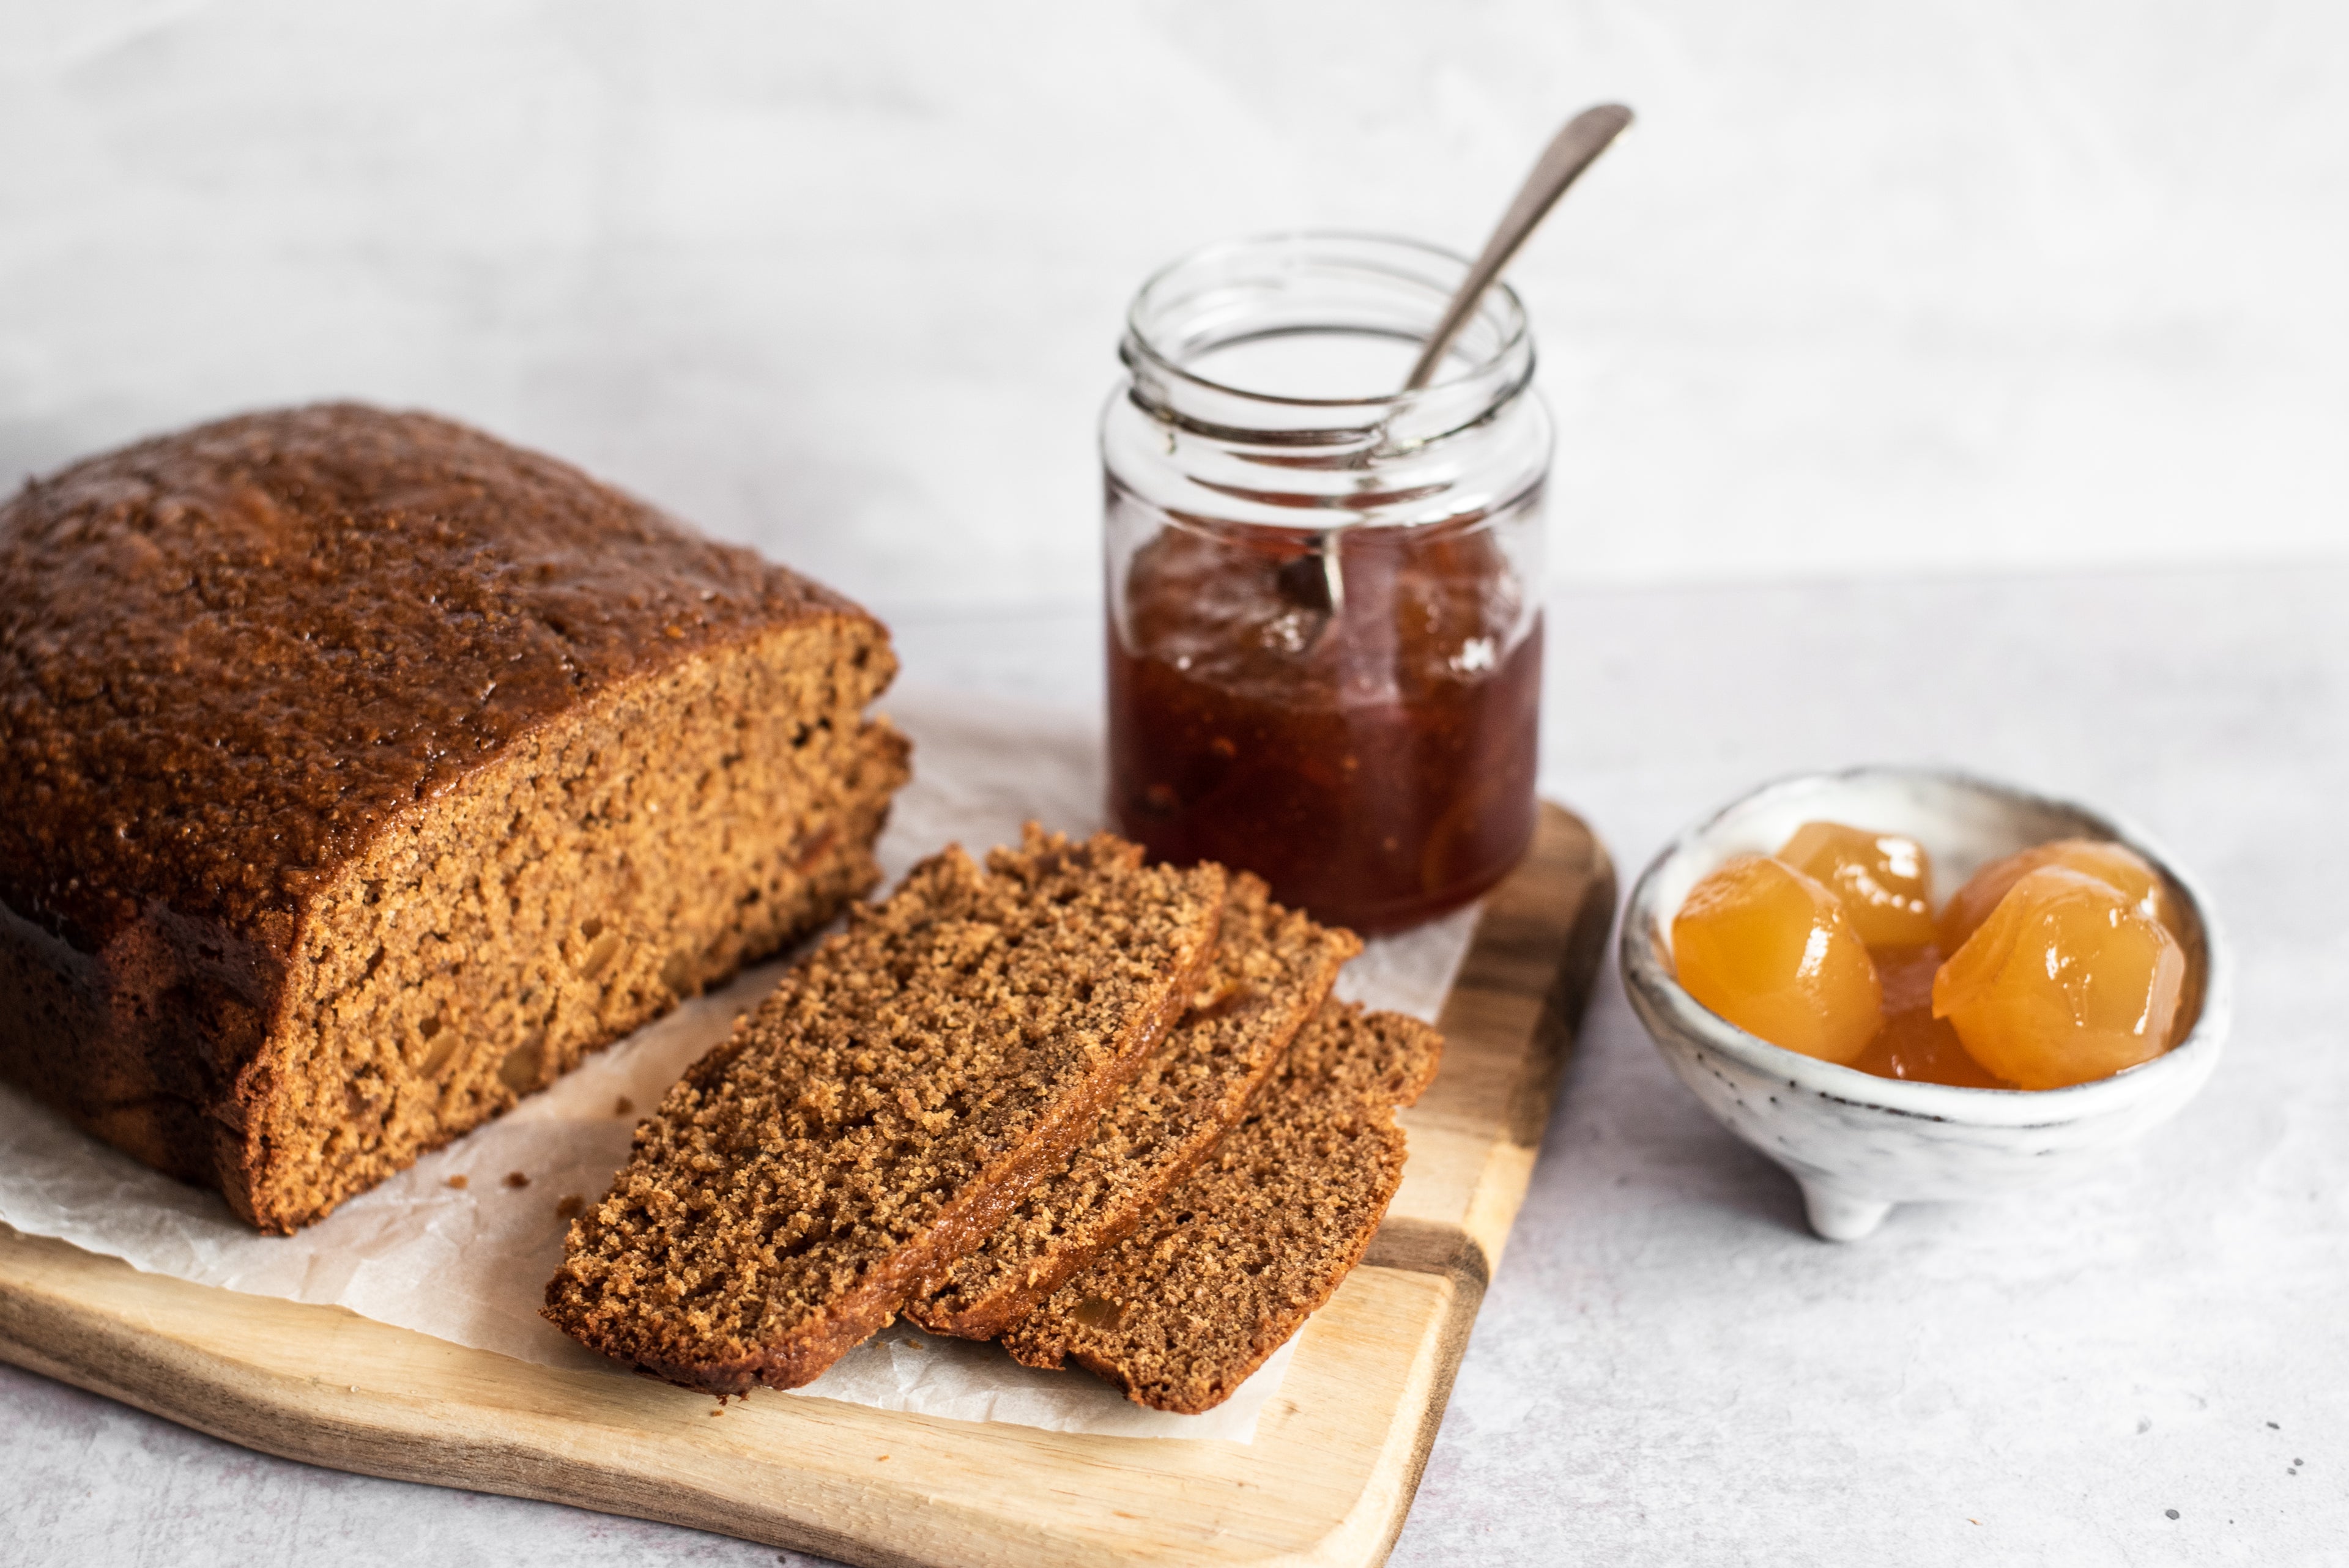 Gingerbread loaf on bread board, three slices infront, ginger in bowl and marmalade